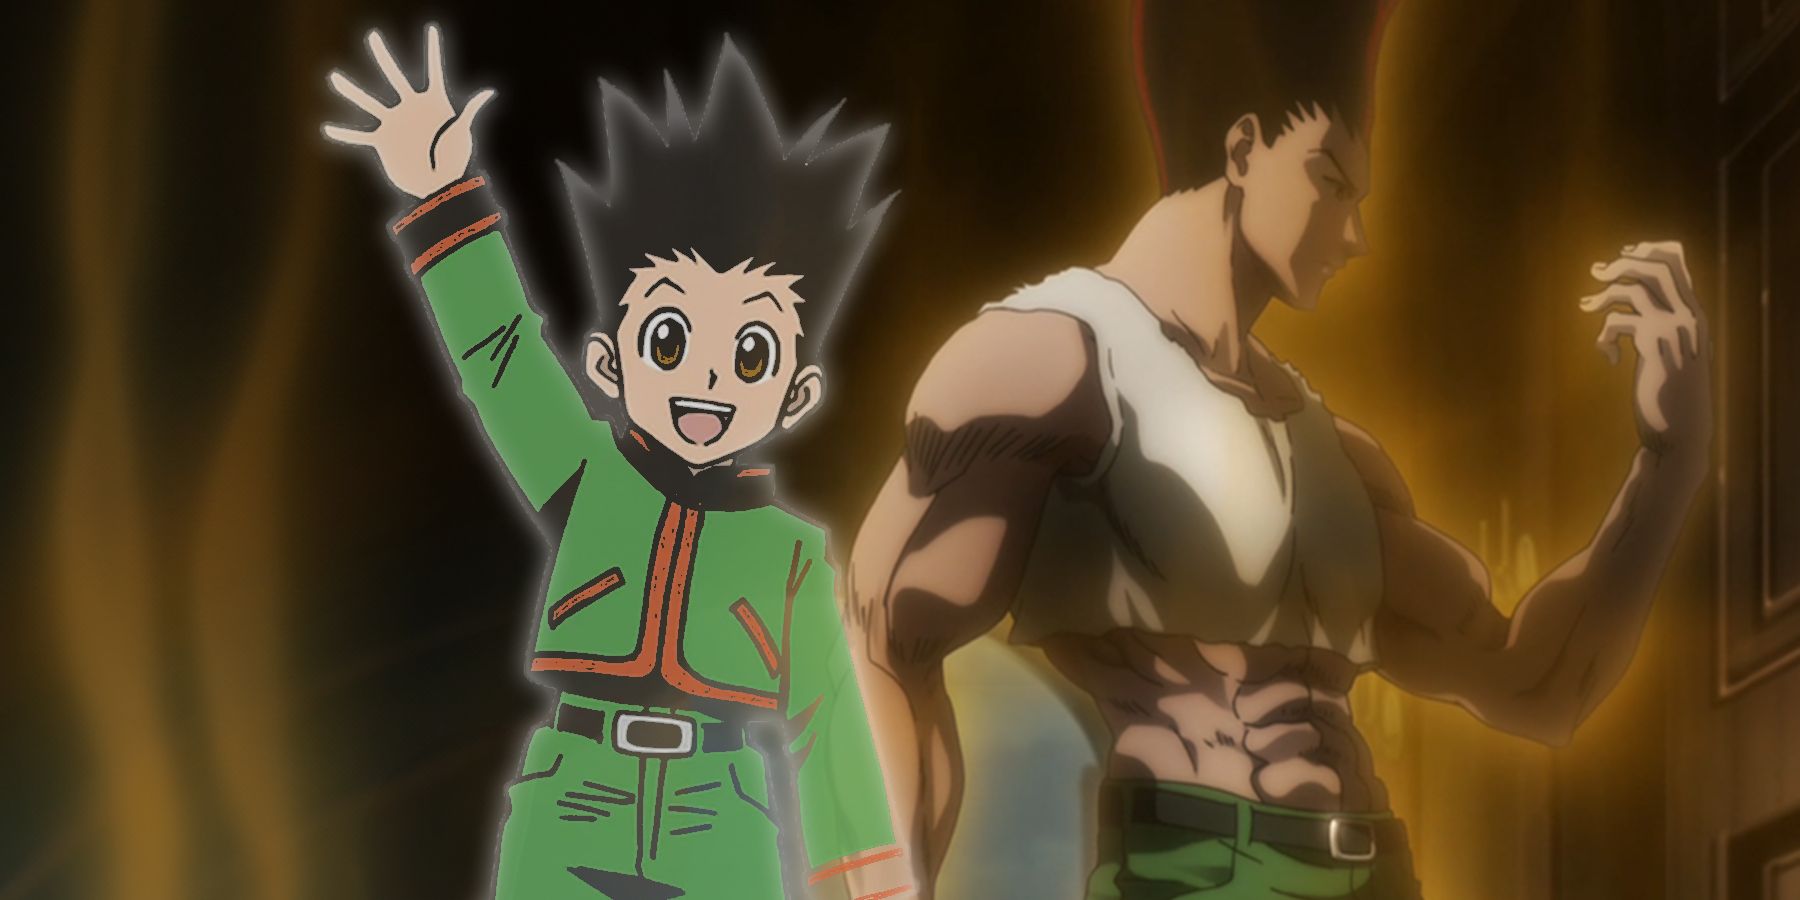 Was Gon Fated To Descend Into Darkness?